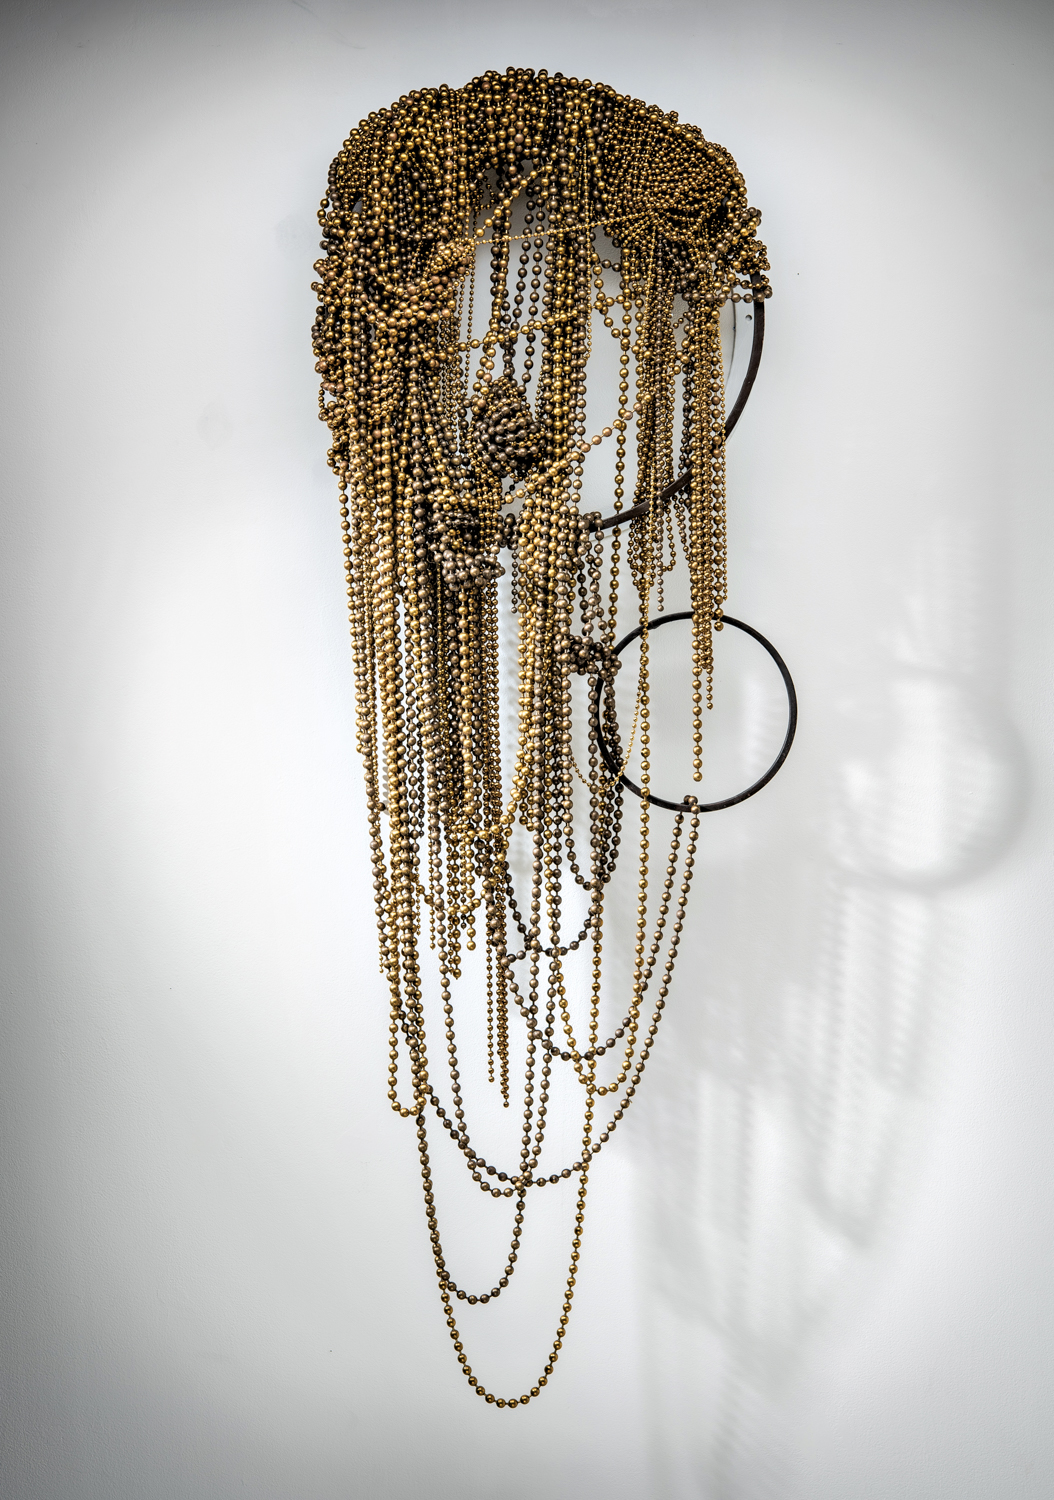 Wall hanging made of gold industrial ball chain and metal hoops.